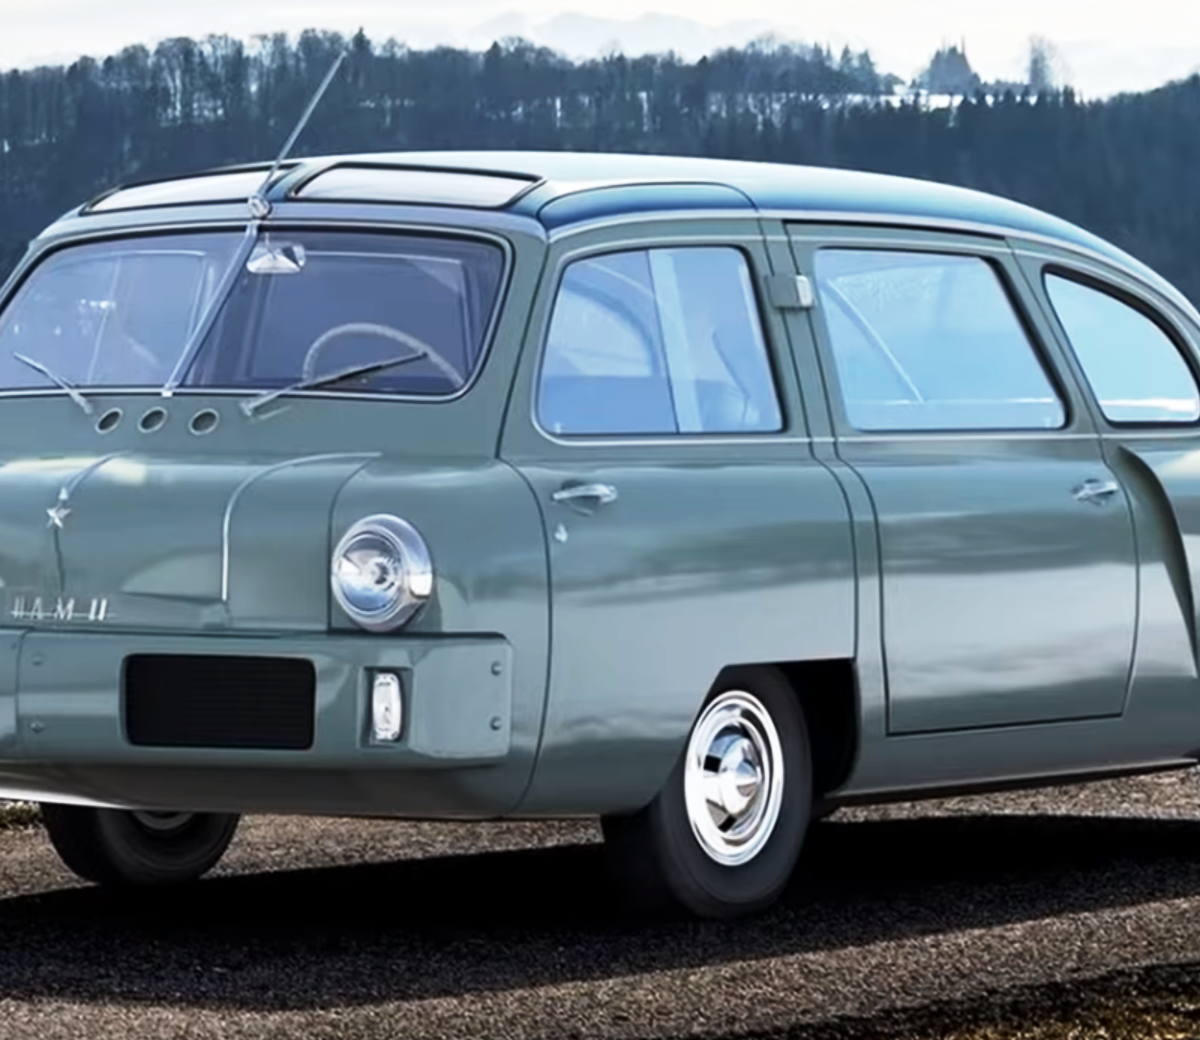 The first Soviet minivan NAMI-013, never put into production